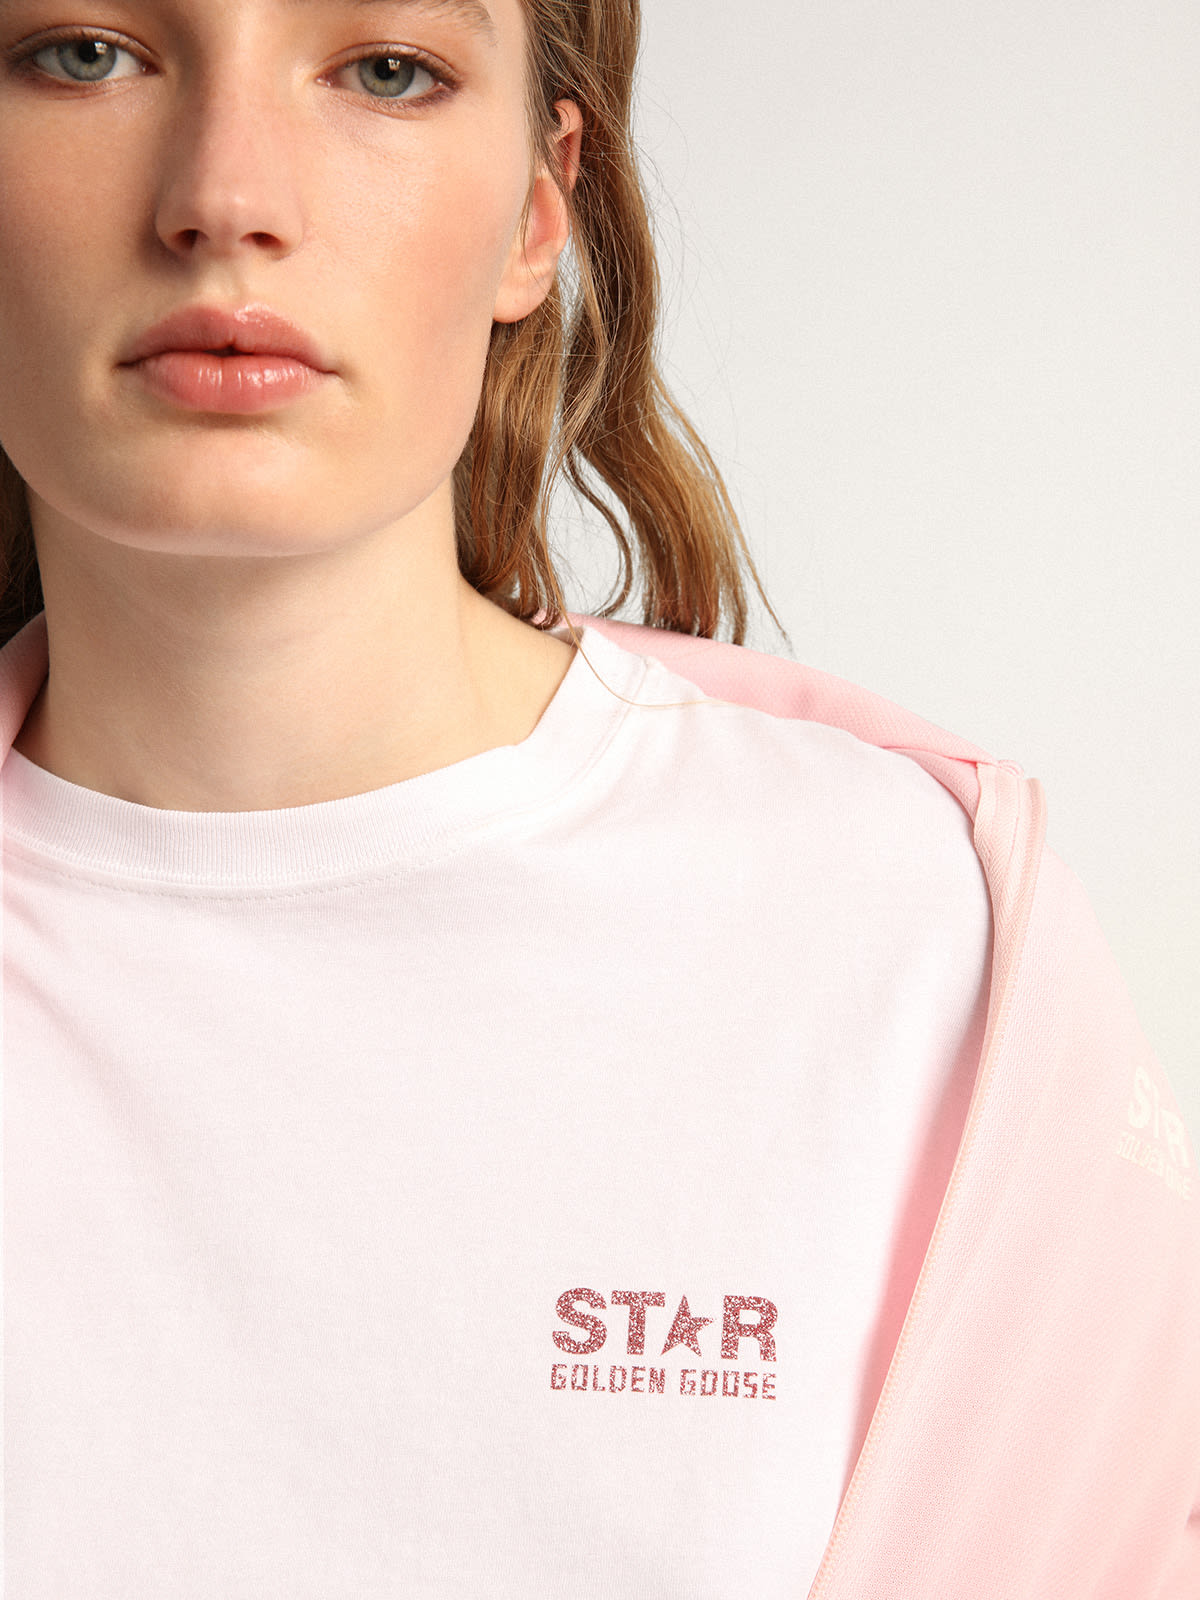 Women's white T-shirt with pink glitter logo and star